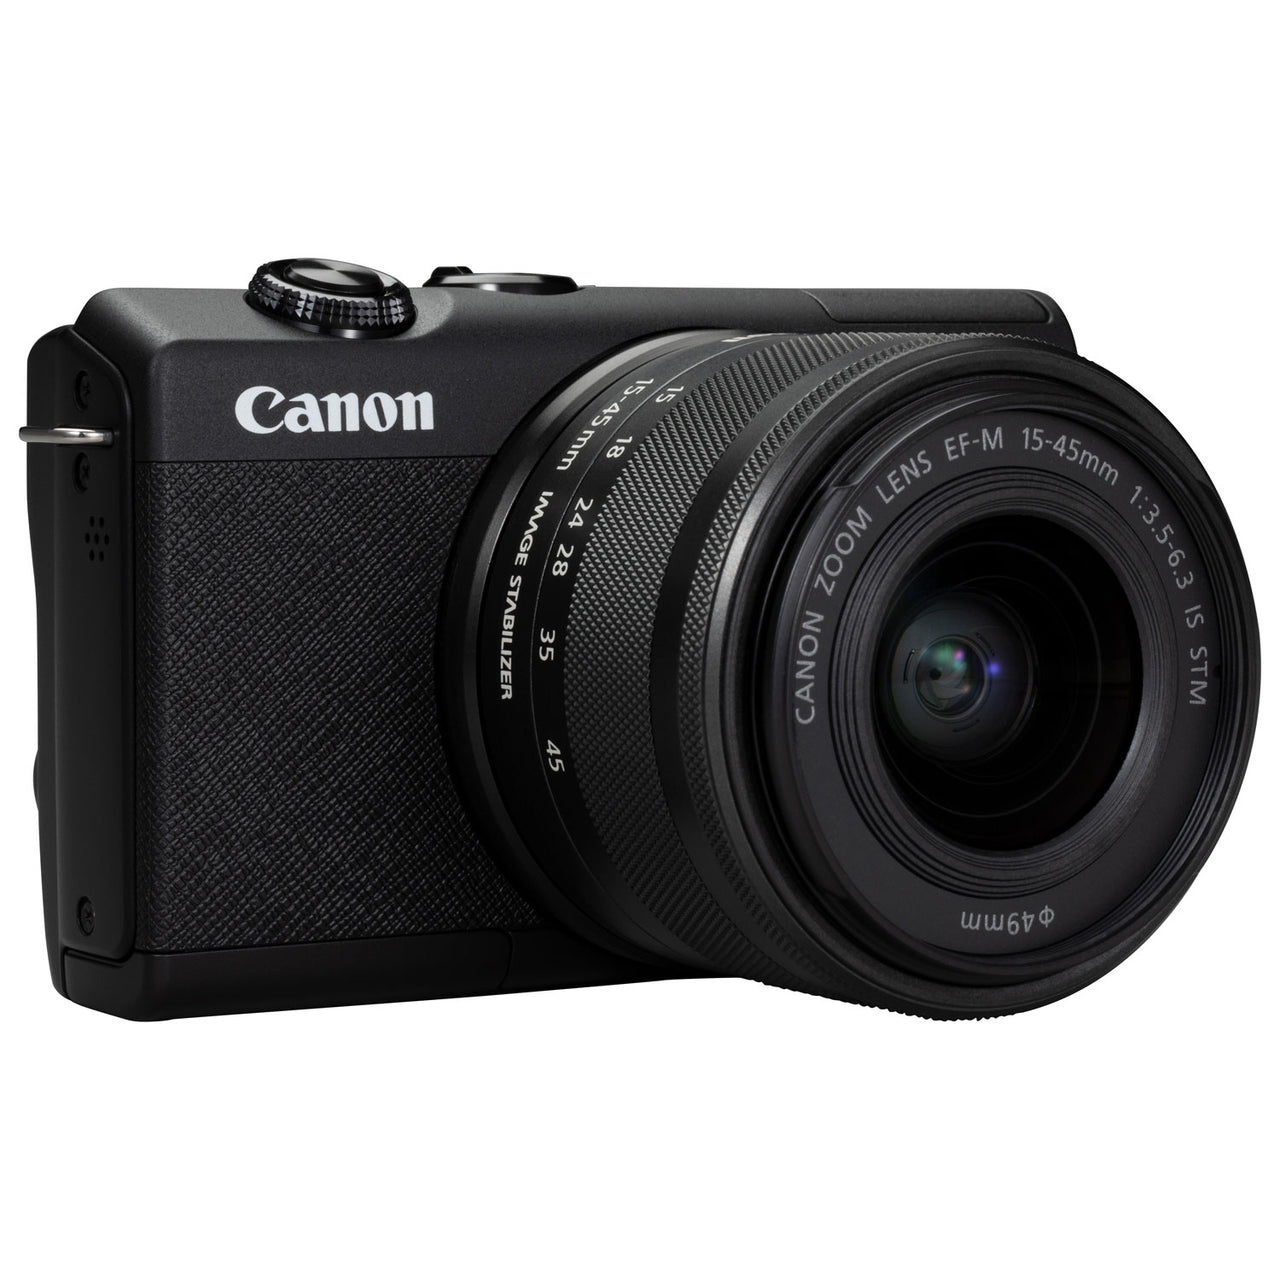 Canon EOS M200 Mirrorless Camera with 15-45mm IS STM Lens Kit